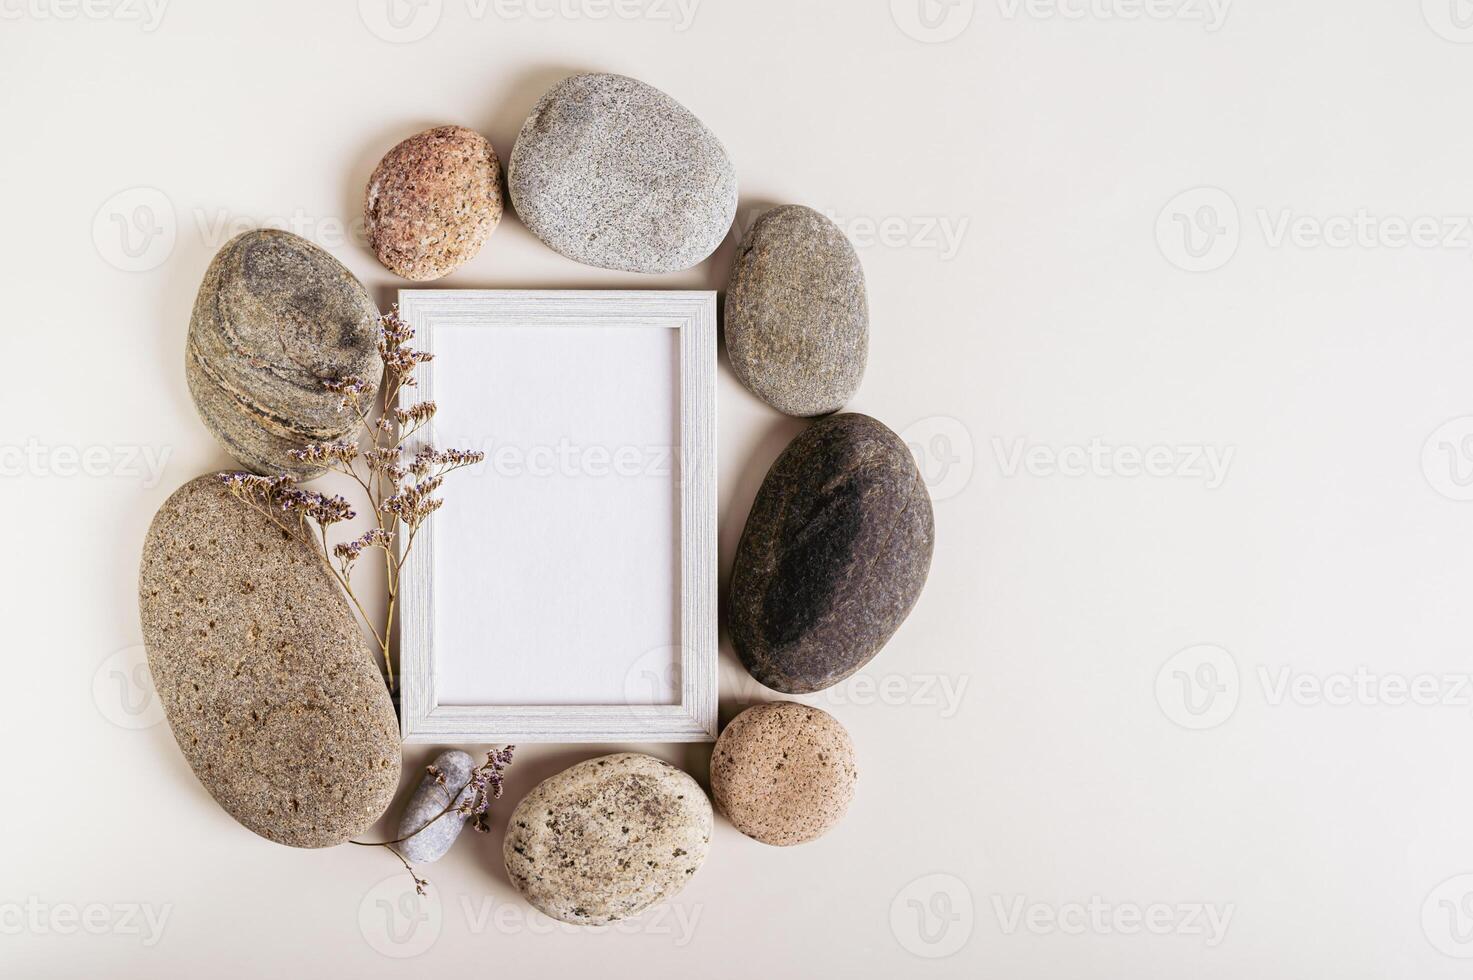 Empty photo frame with a dry flower surrounded by stones on a light background